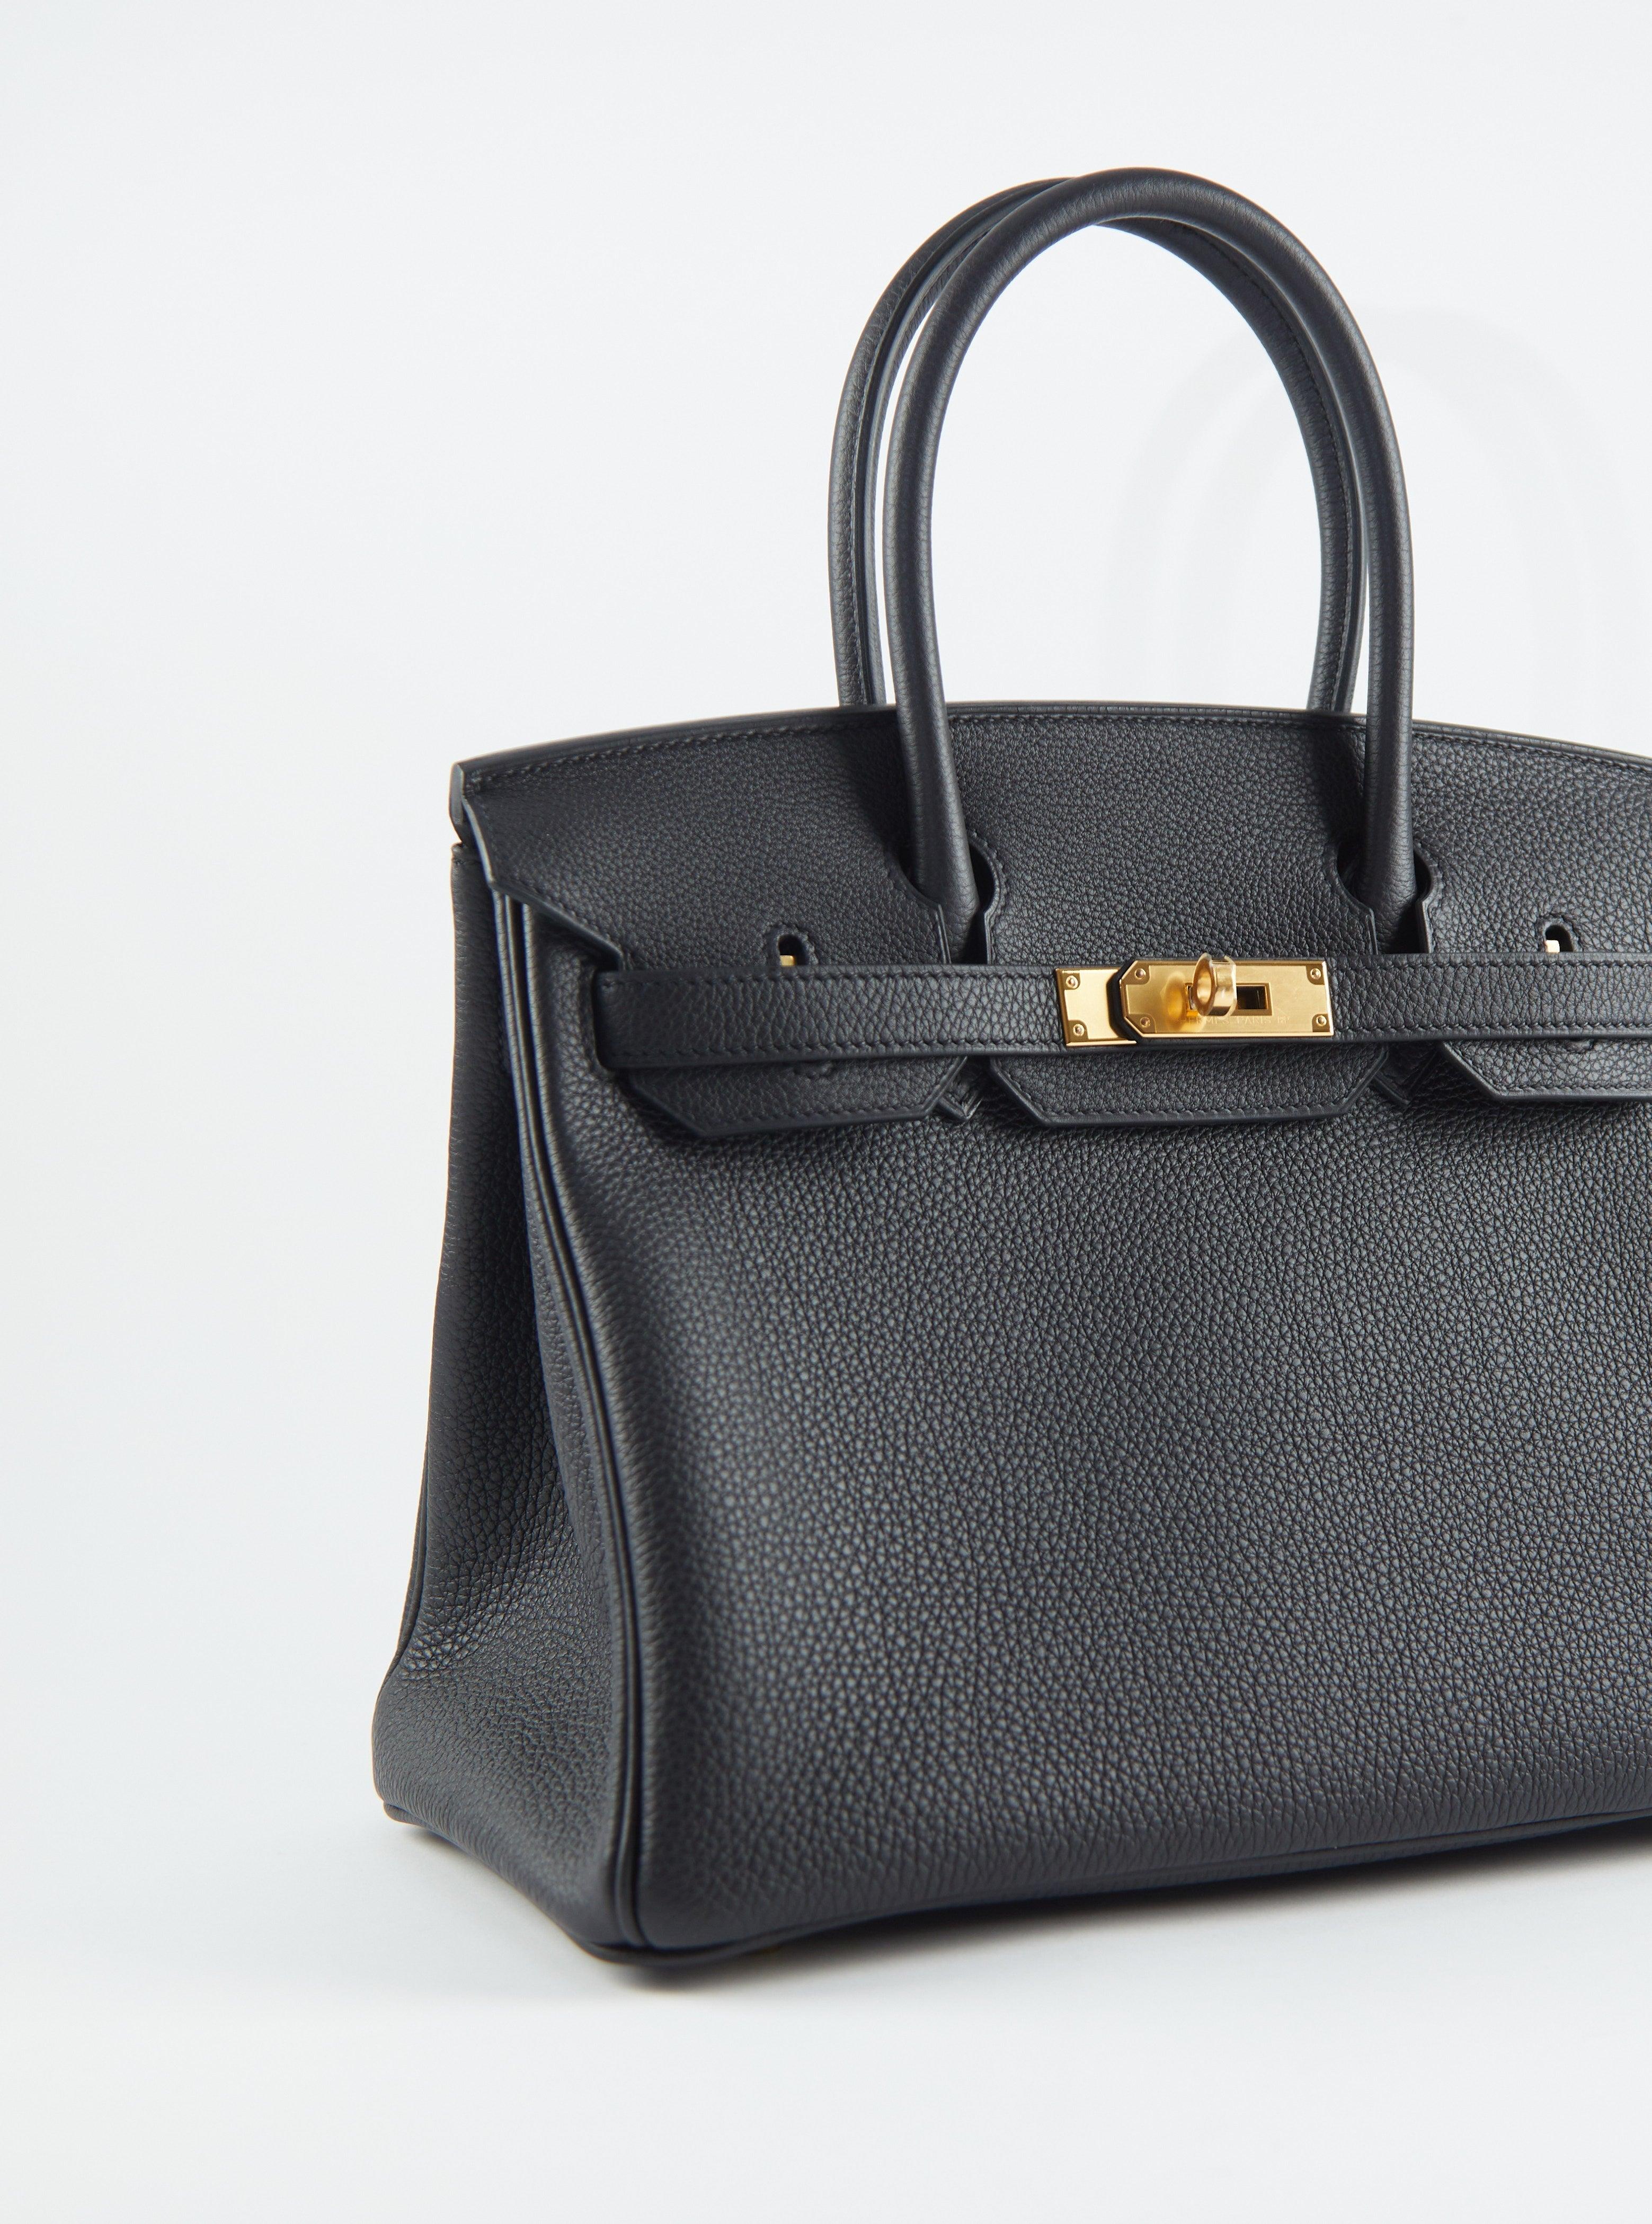 HERMÈS BIRKIN 30CM BLACK Togo Leather with Gold Hardware In Excellent Condition For Sale In London, GB